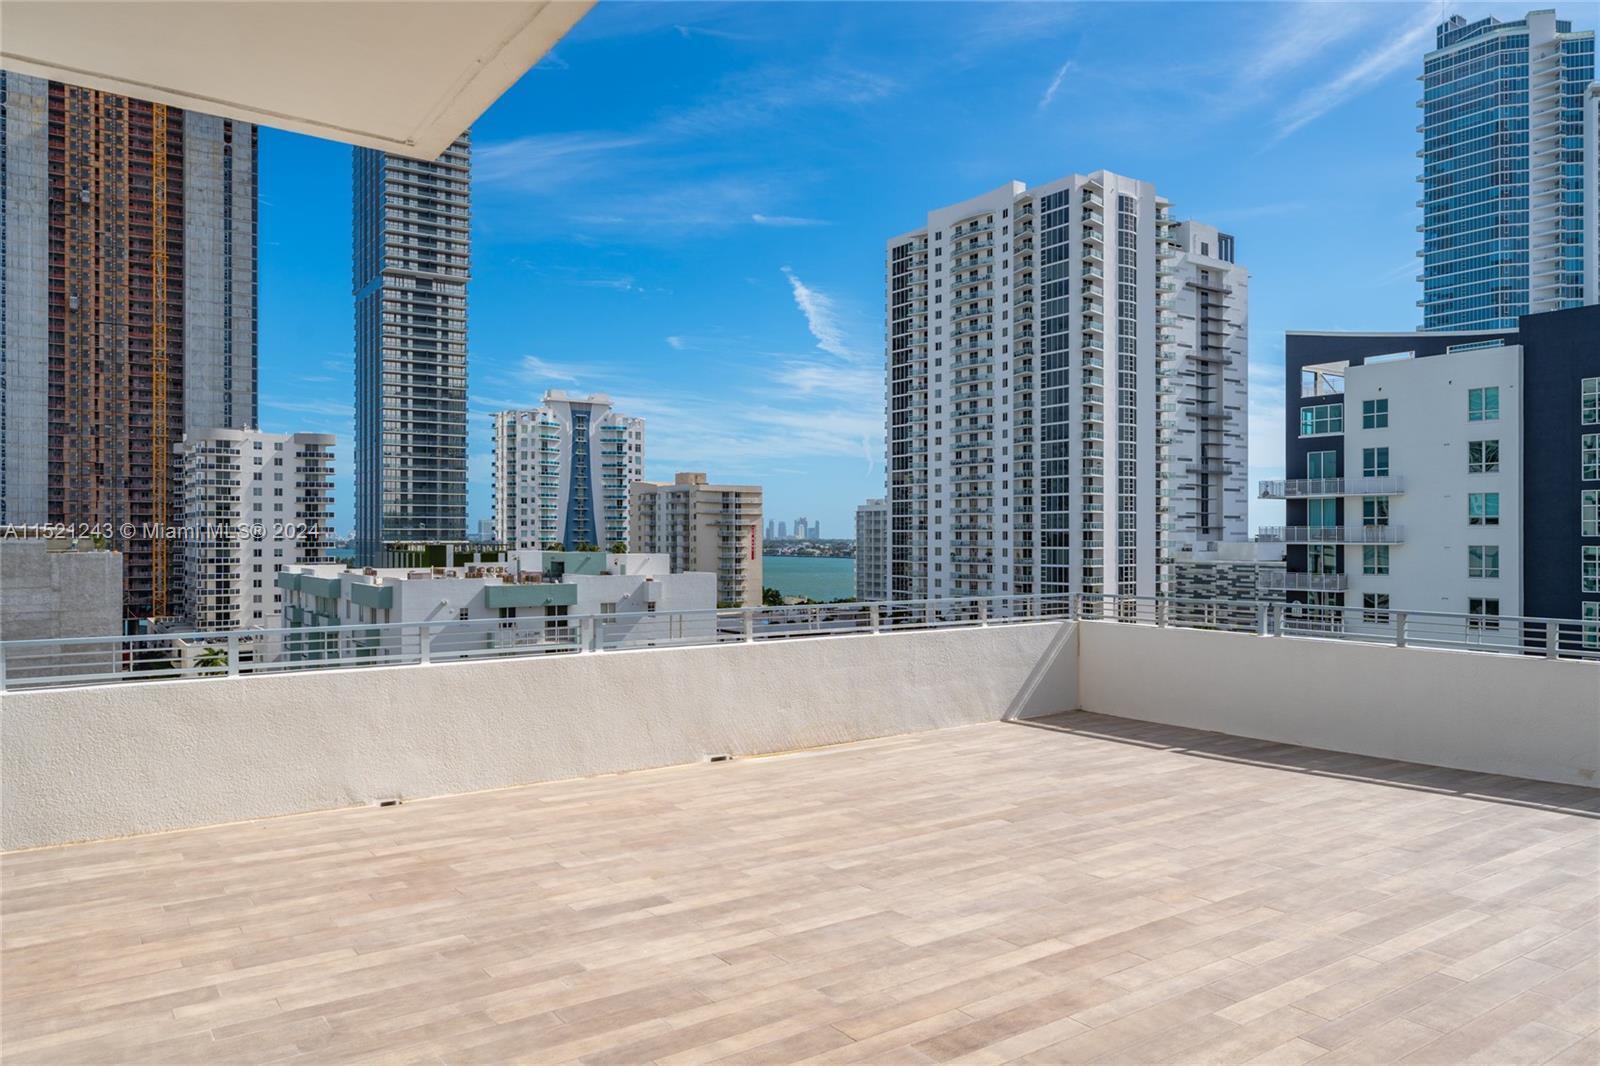 One of a kind 2 bed & 2 bath residence w/ a 980 SF terrace for outdoor entertainment in Miami, FL.  